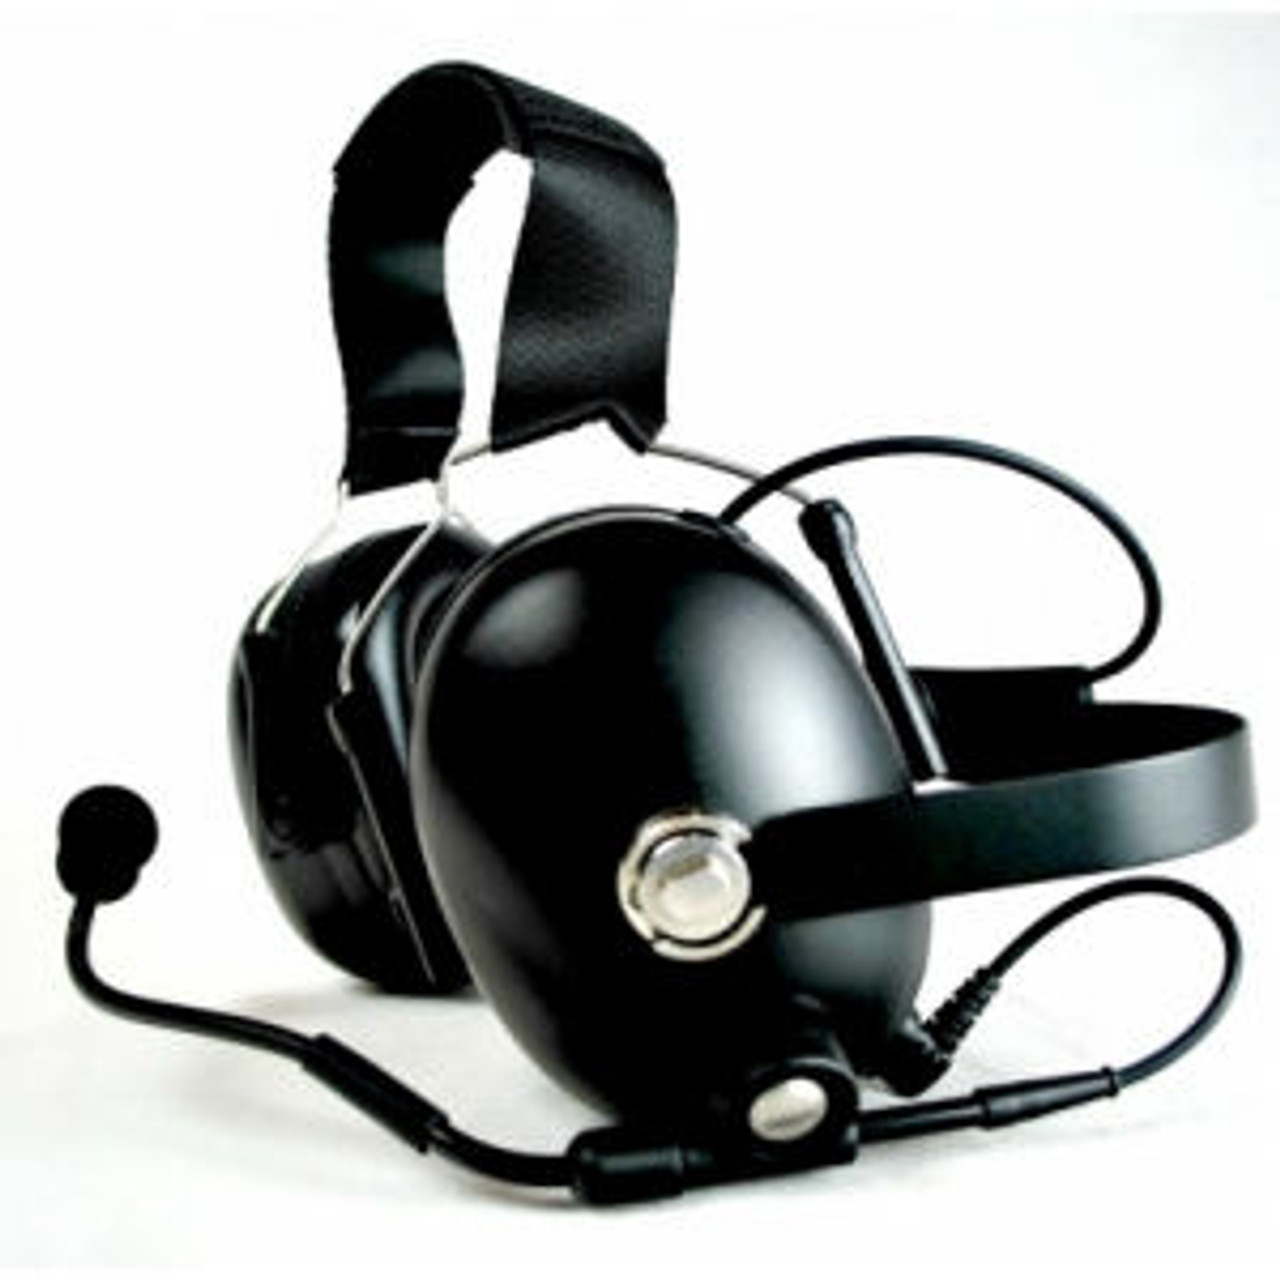 EF Johnson TK-5330 Noise Canceling Double Muff Behind The Head Headset